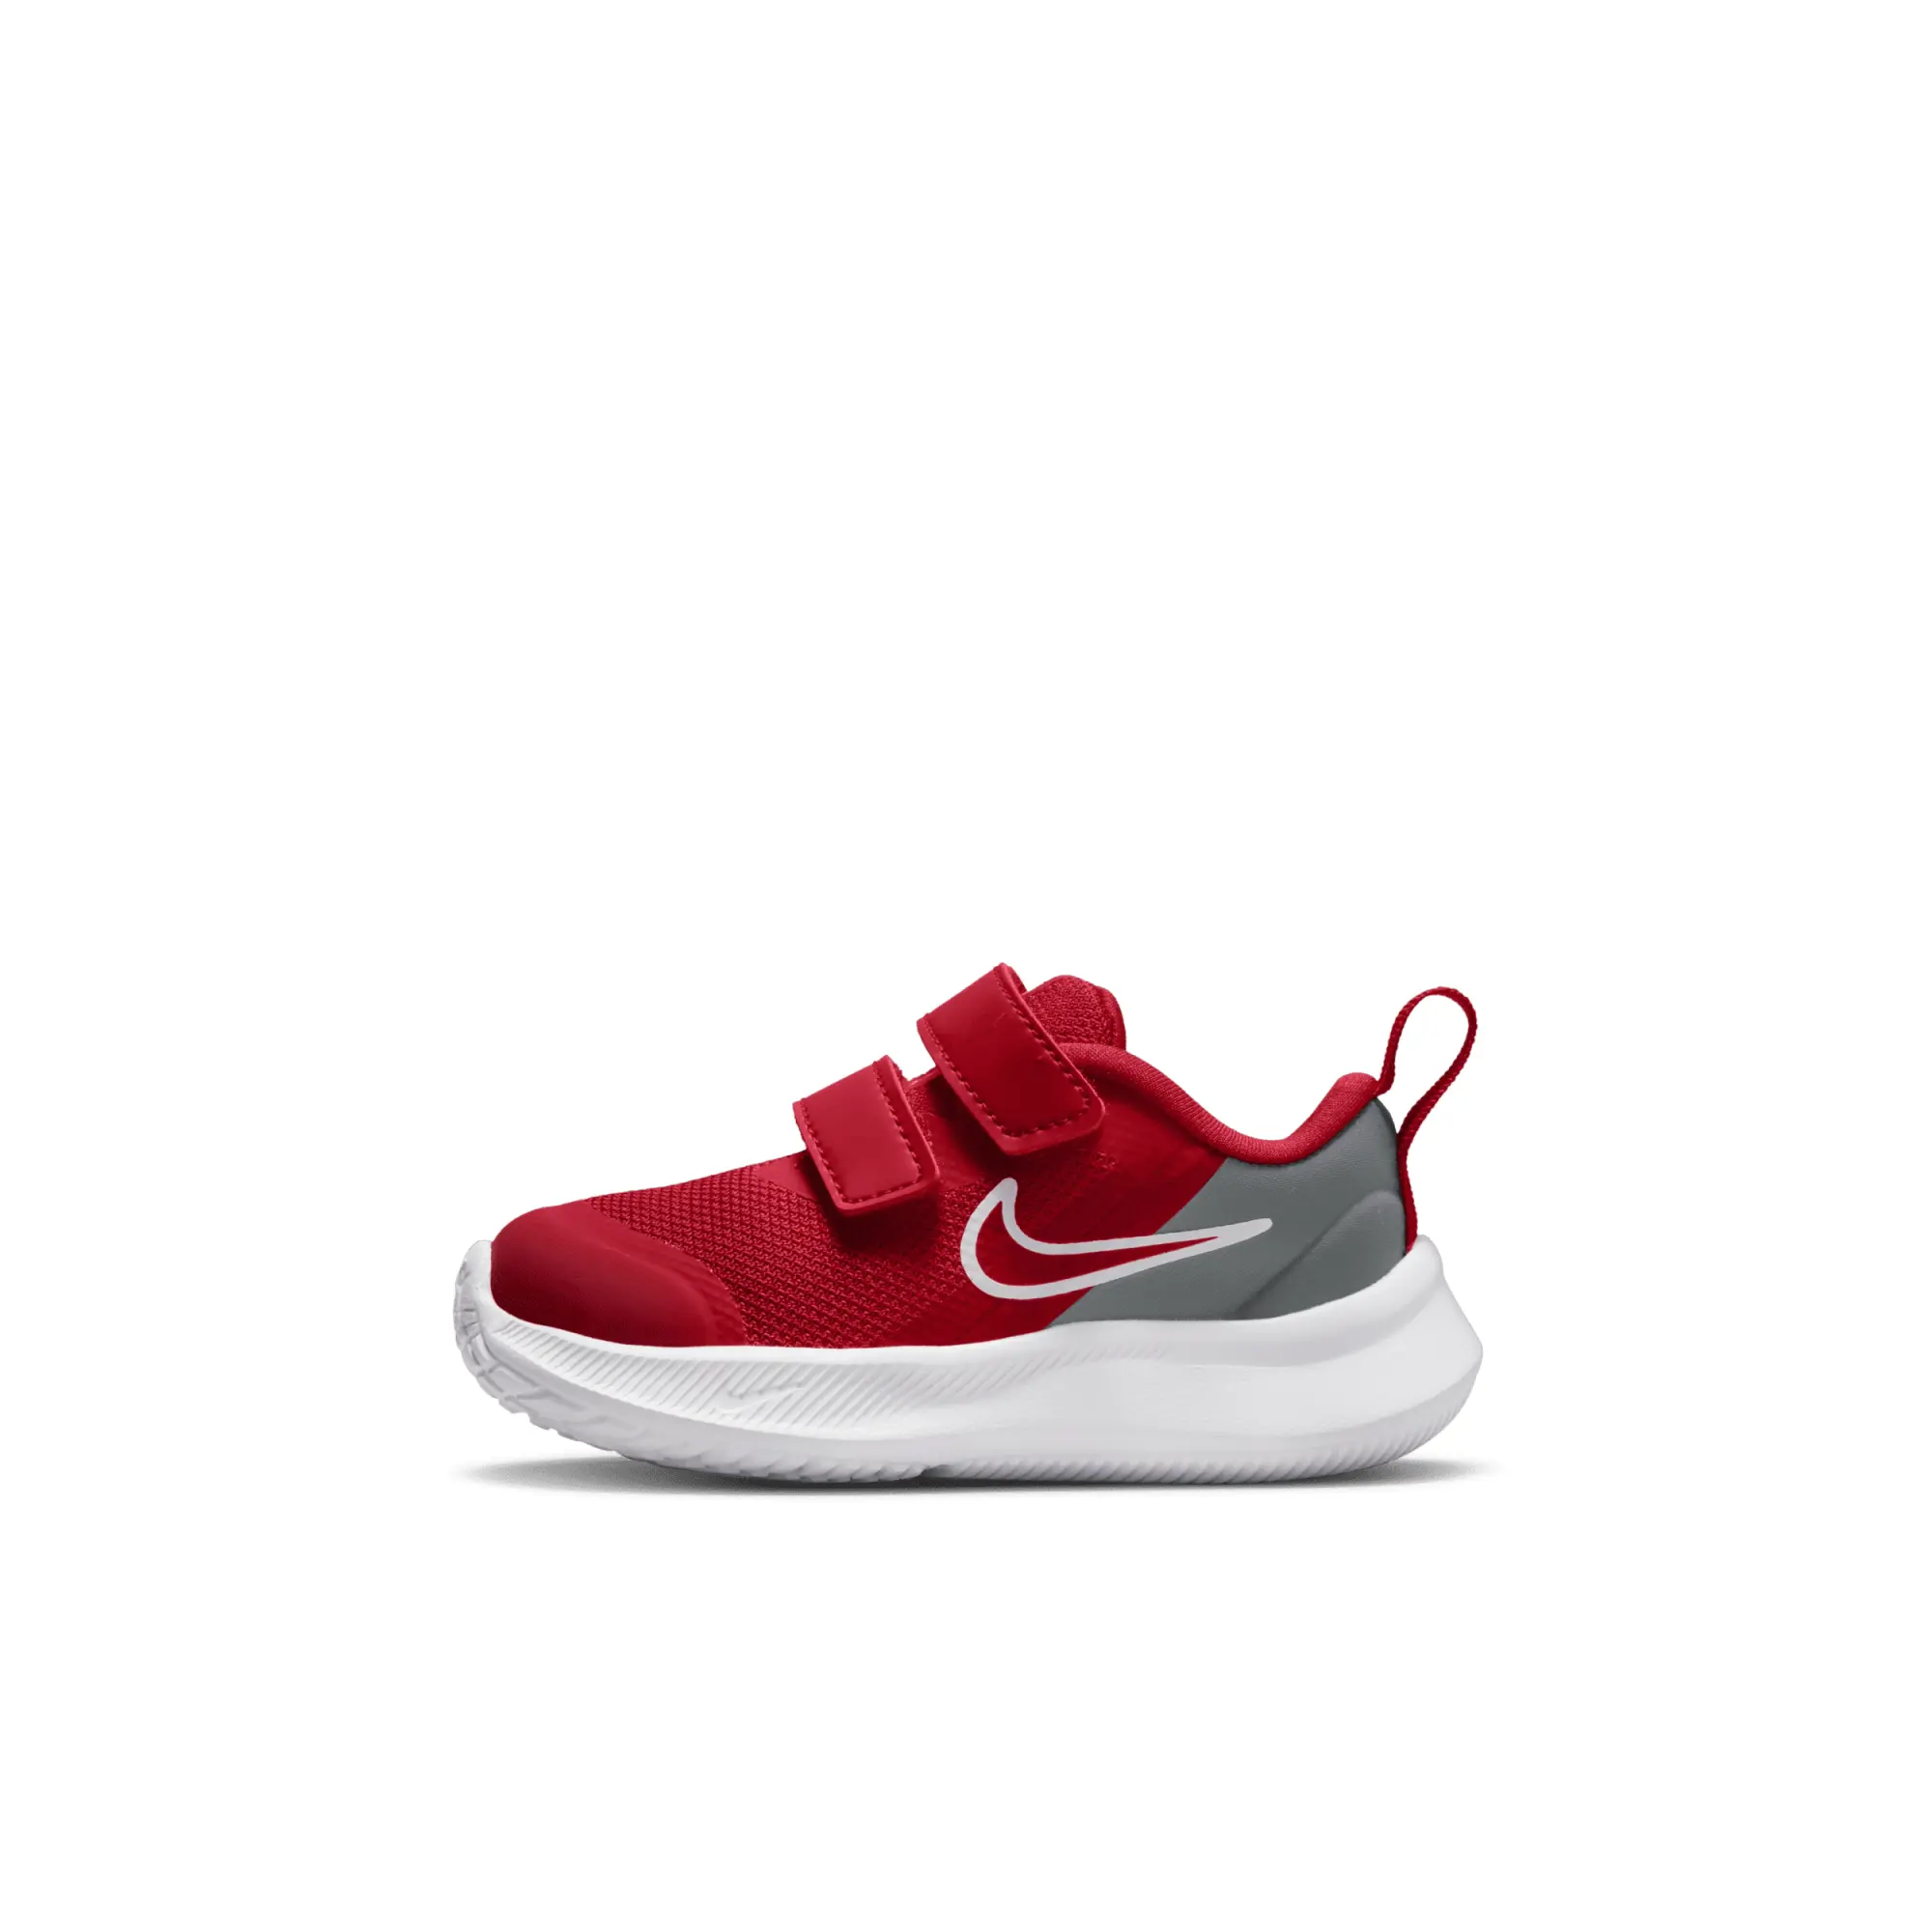 Nike Star Runner 3 Baby/Toddler Shoes - Red